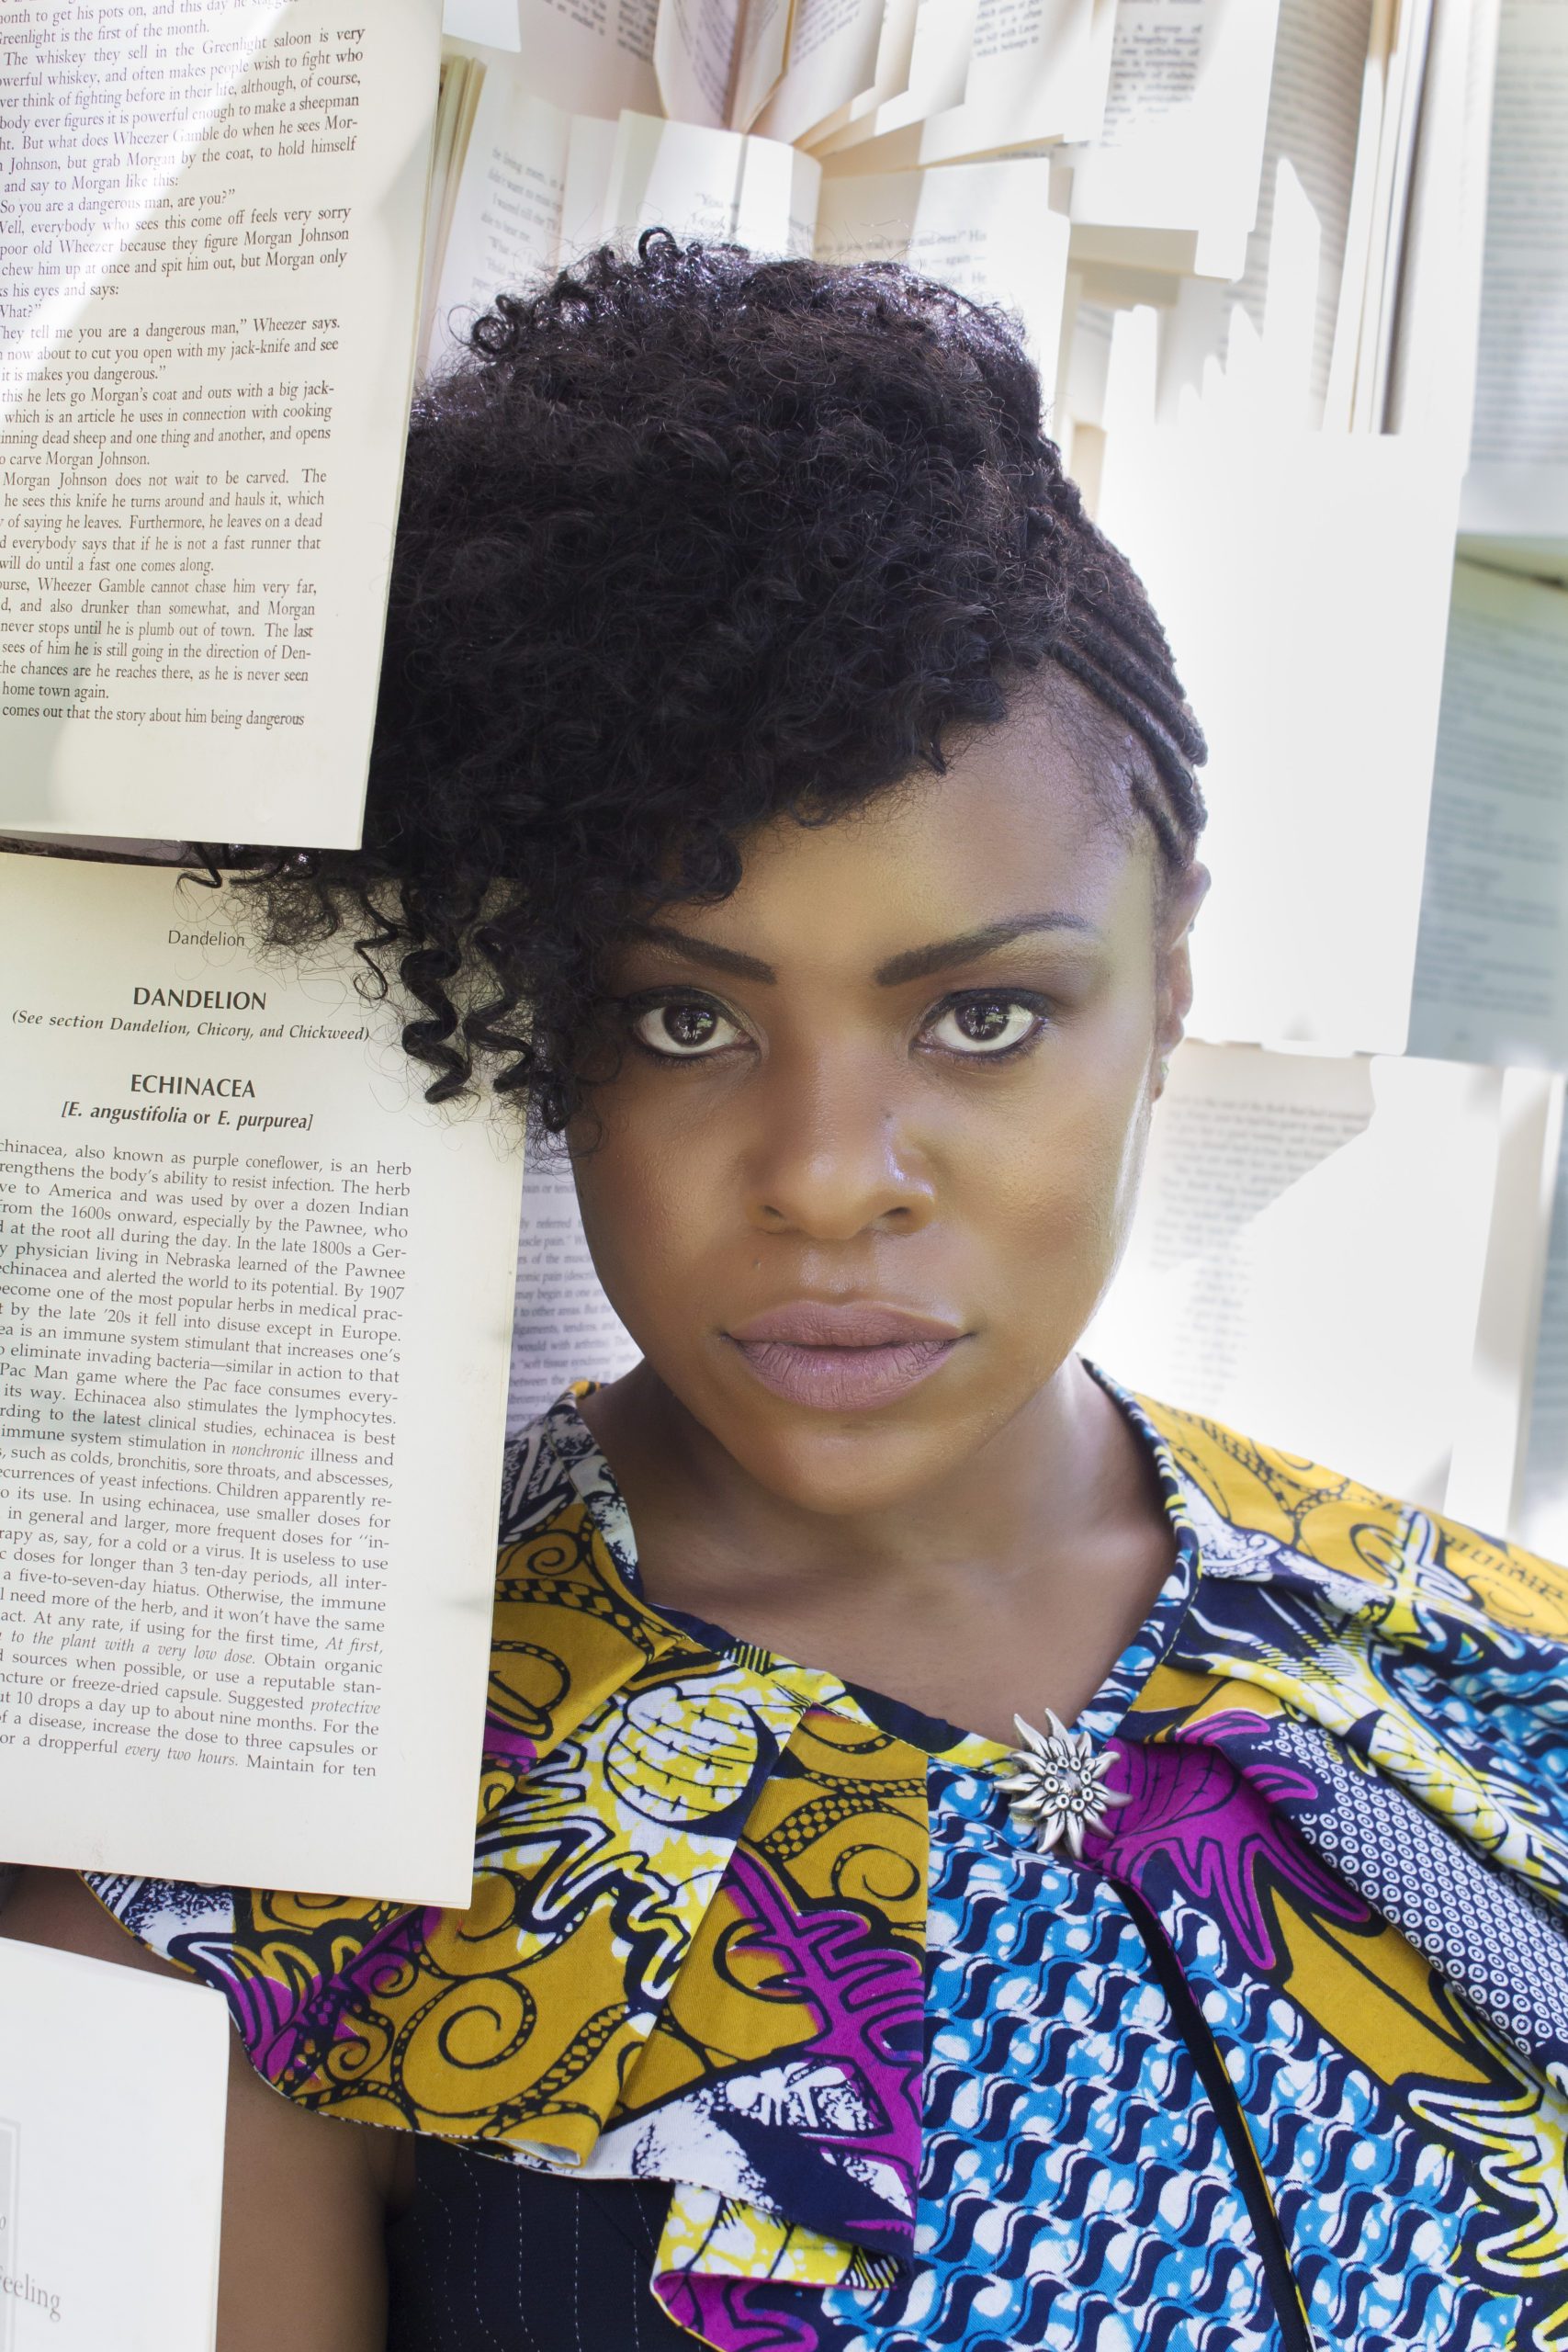 A photo of Kimbilio Fellow, novelist Nana Nkweti.  She wears a colorful blouse and poses surrounded by various manuscripts.  